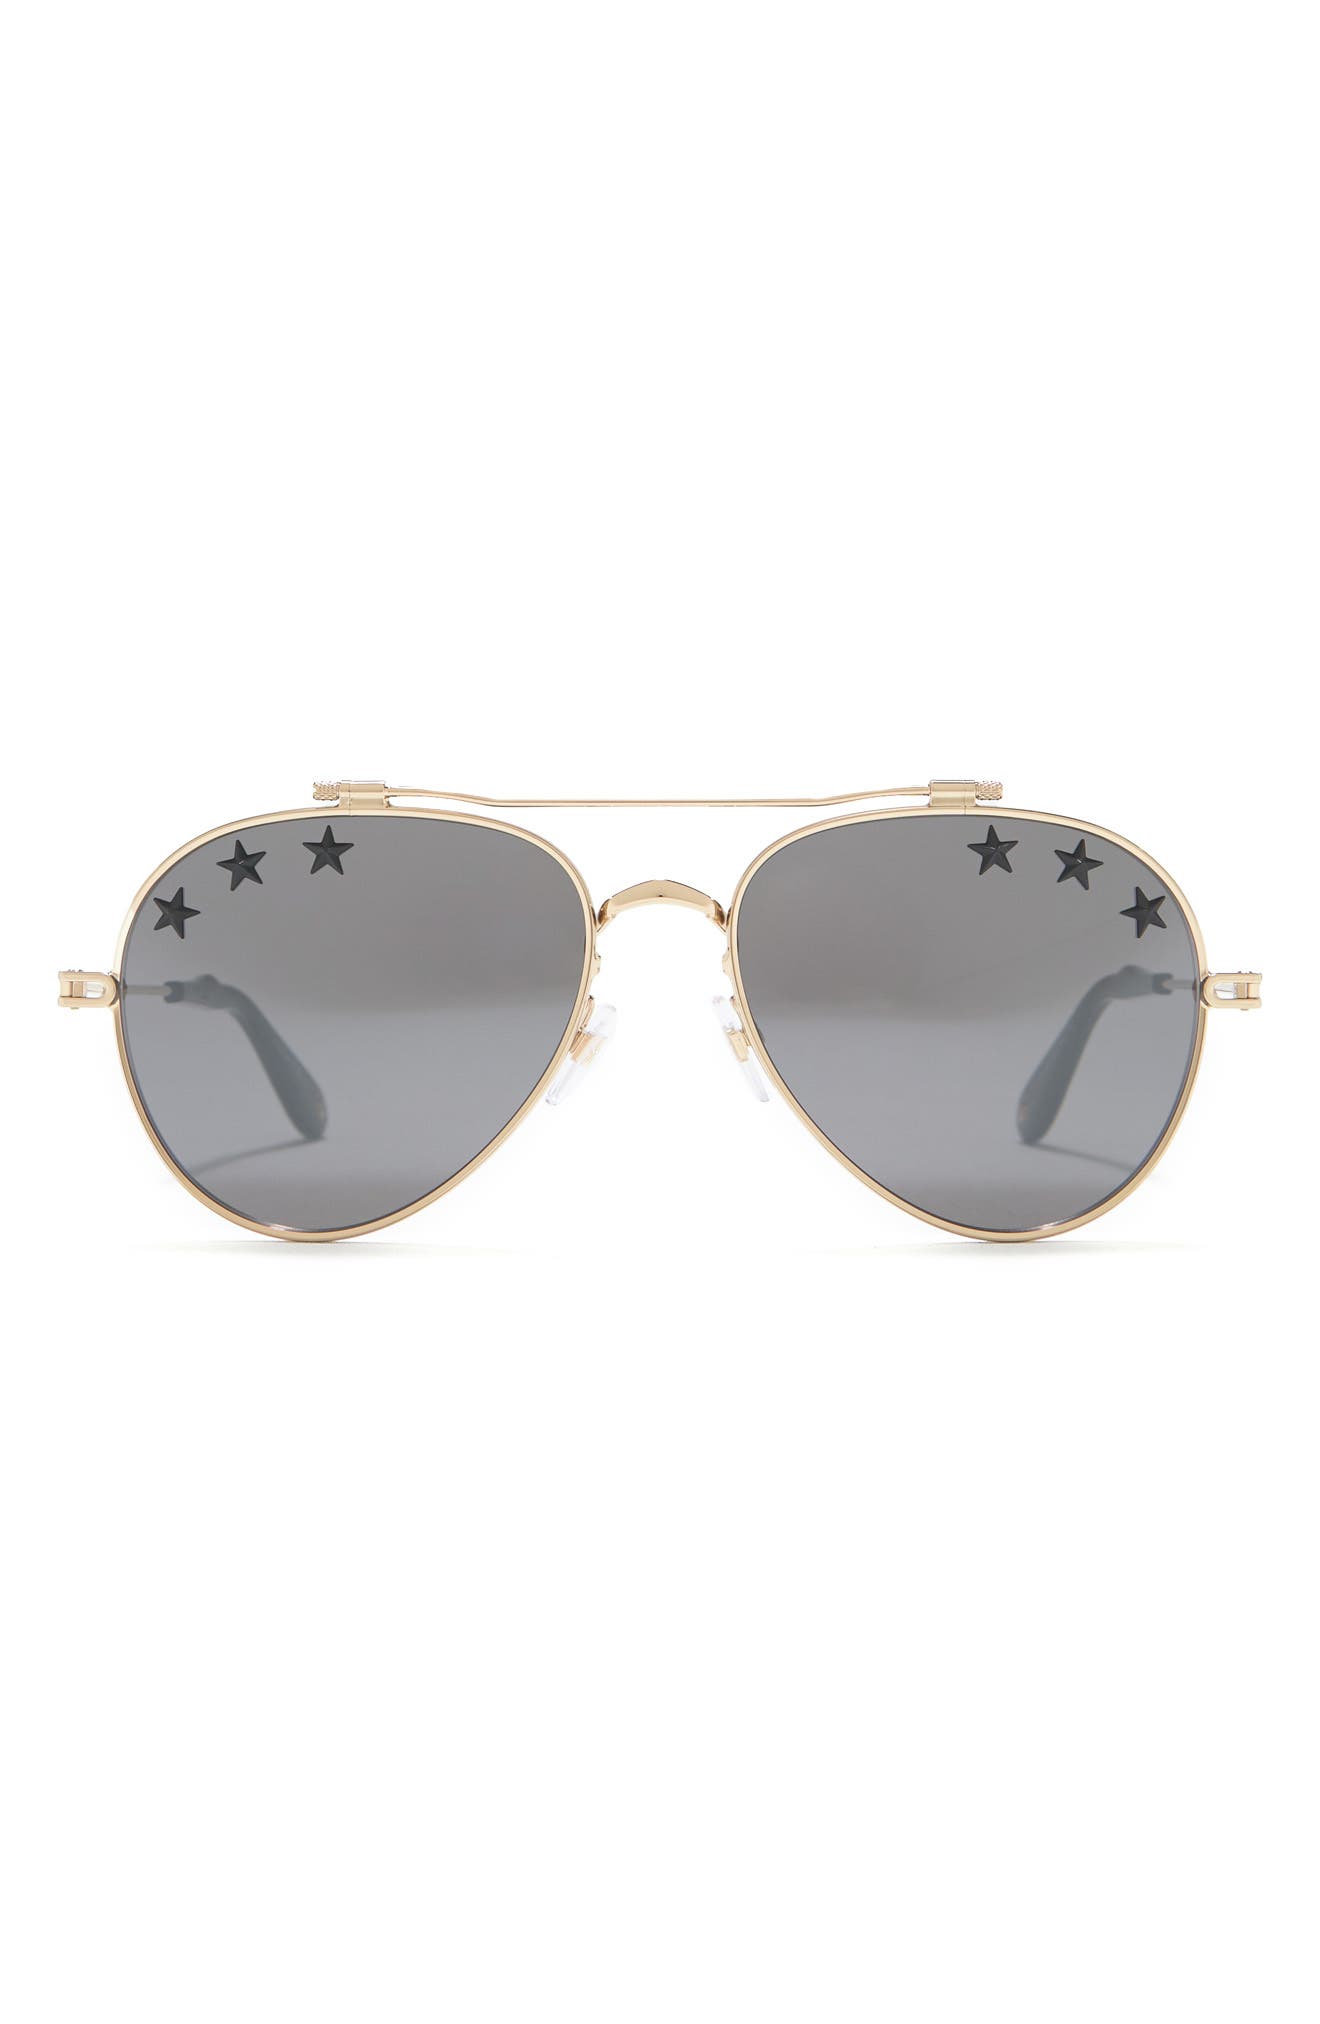 Givenchy Star Detail 58mm Mirrored Aviator Sunglasses In Gold / Silver Mirror